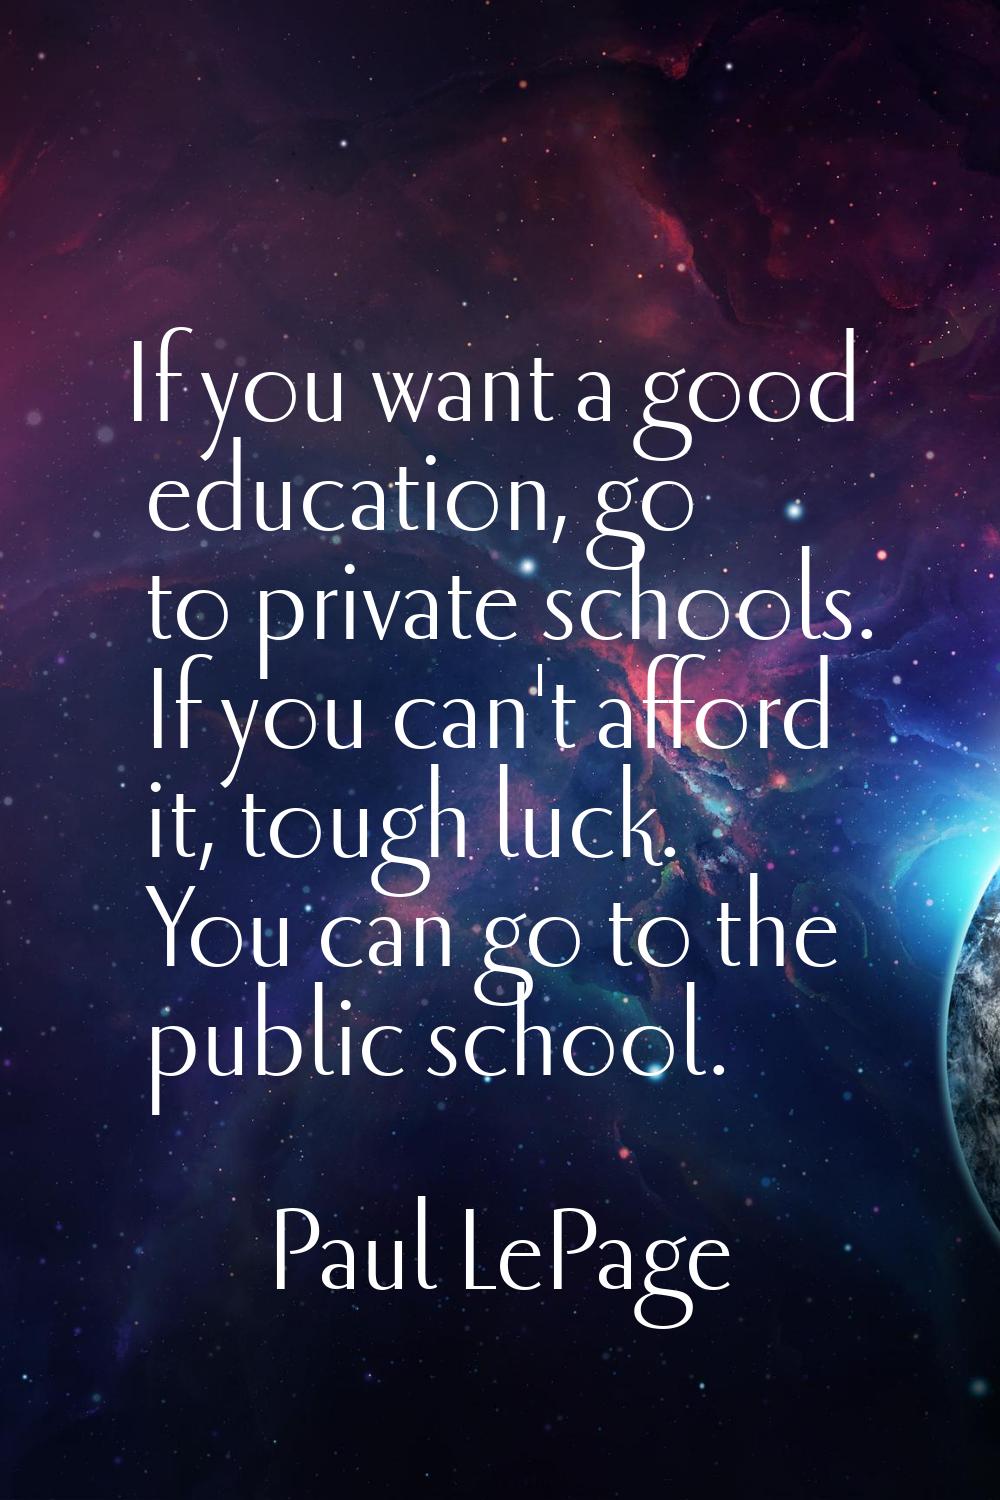 If you want a good education, go to private schools. If you can't afford it, tough luck. You can go